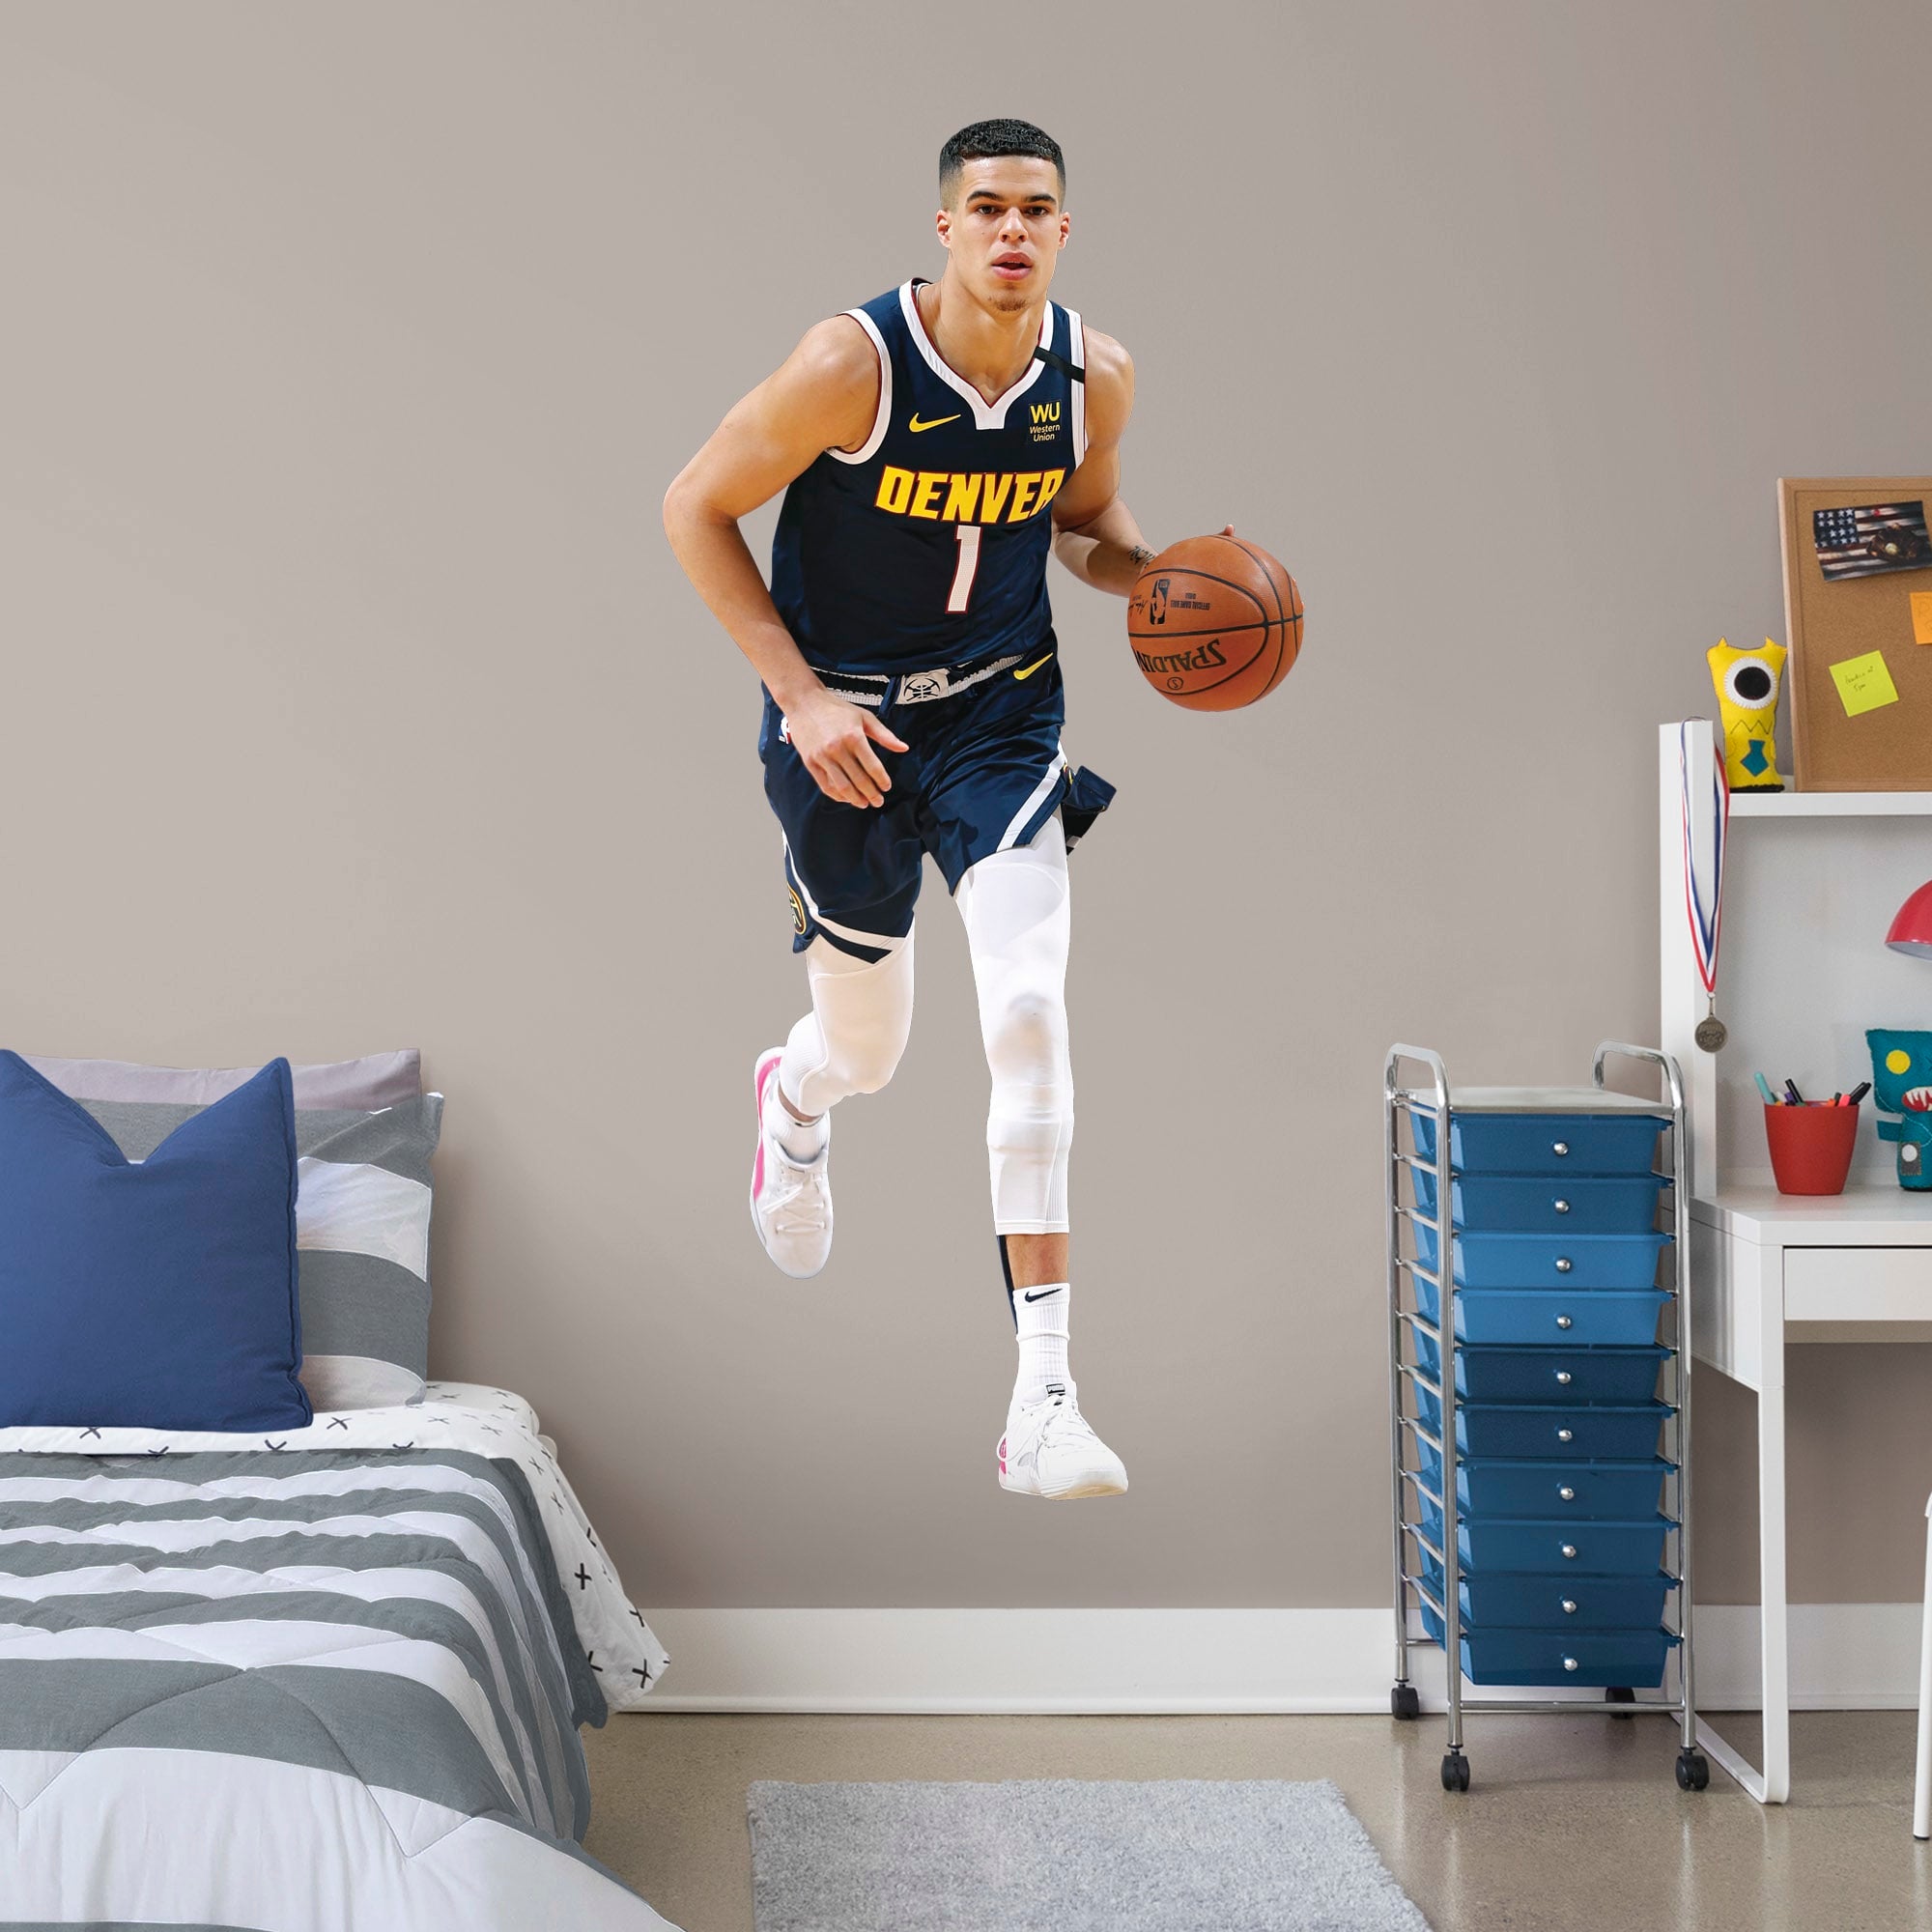 Michael Porter Jr. for Denver Nuggets - Officially Licensed NBA Removable Wall Decal Life-Size Athlete + 2 Decals (36"W x 78"H)